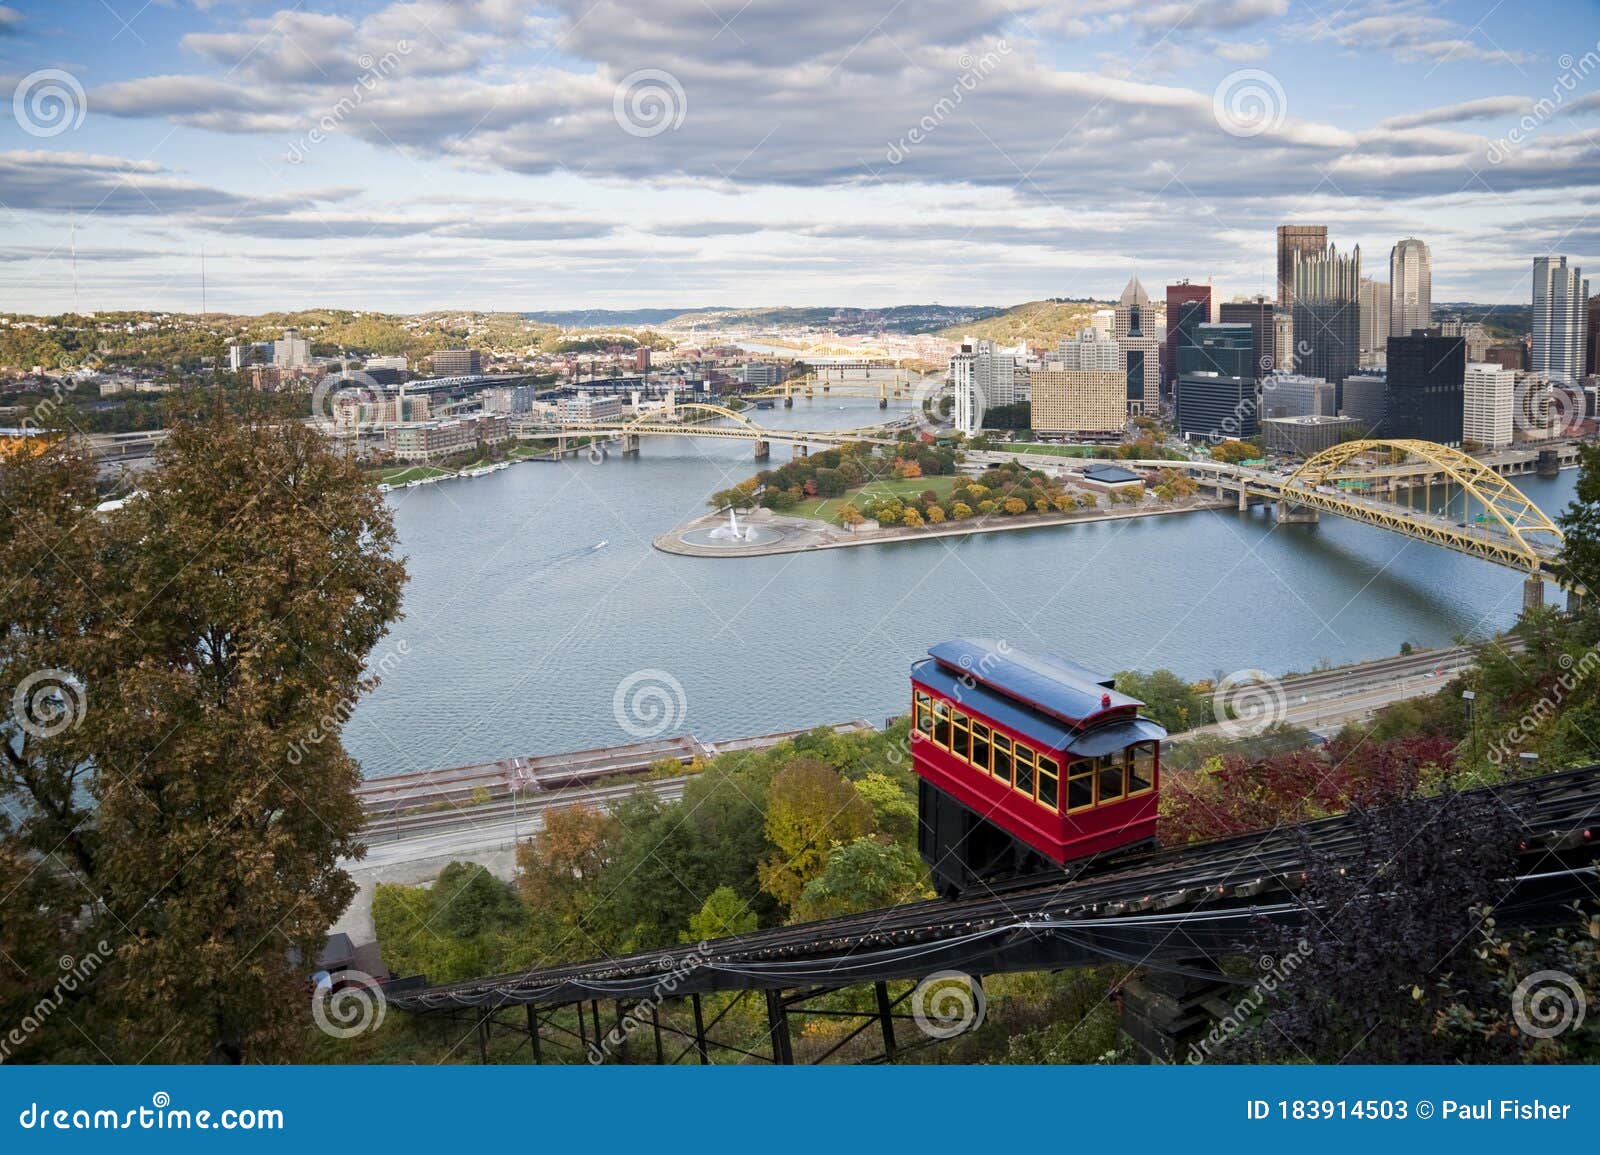 duquesne incline pittsburgh